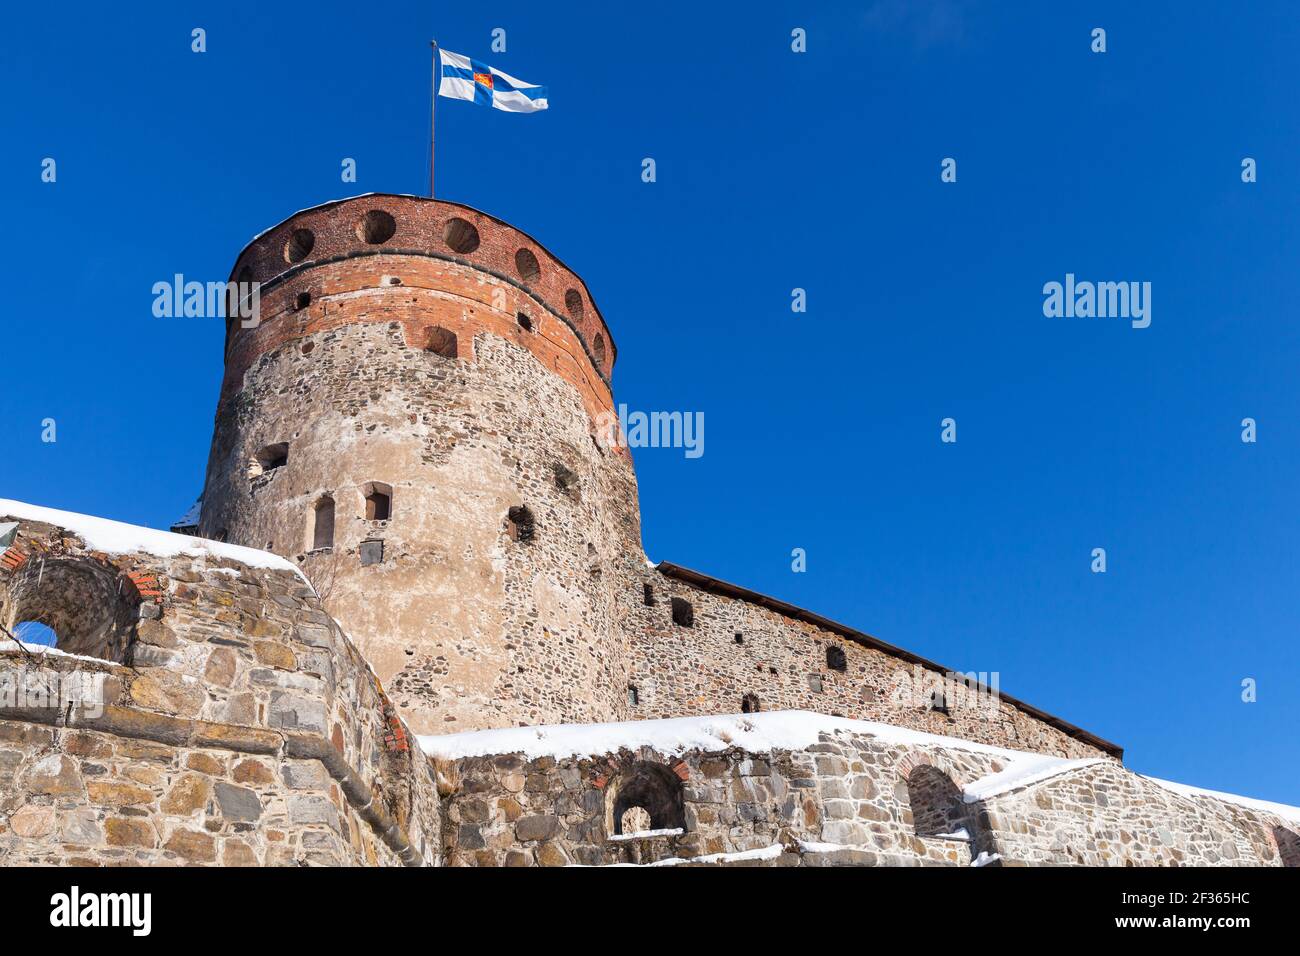 Olavinlinna is under blue sky on a sunny winter day. It is a 15th-century three-tower castle located in Savonlinna, Finland. The fortress was founded Stock Photo